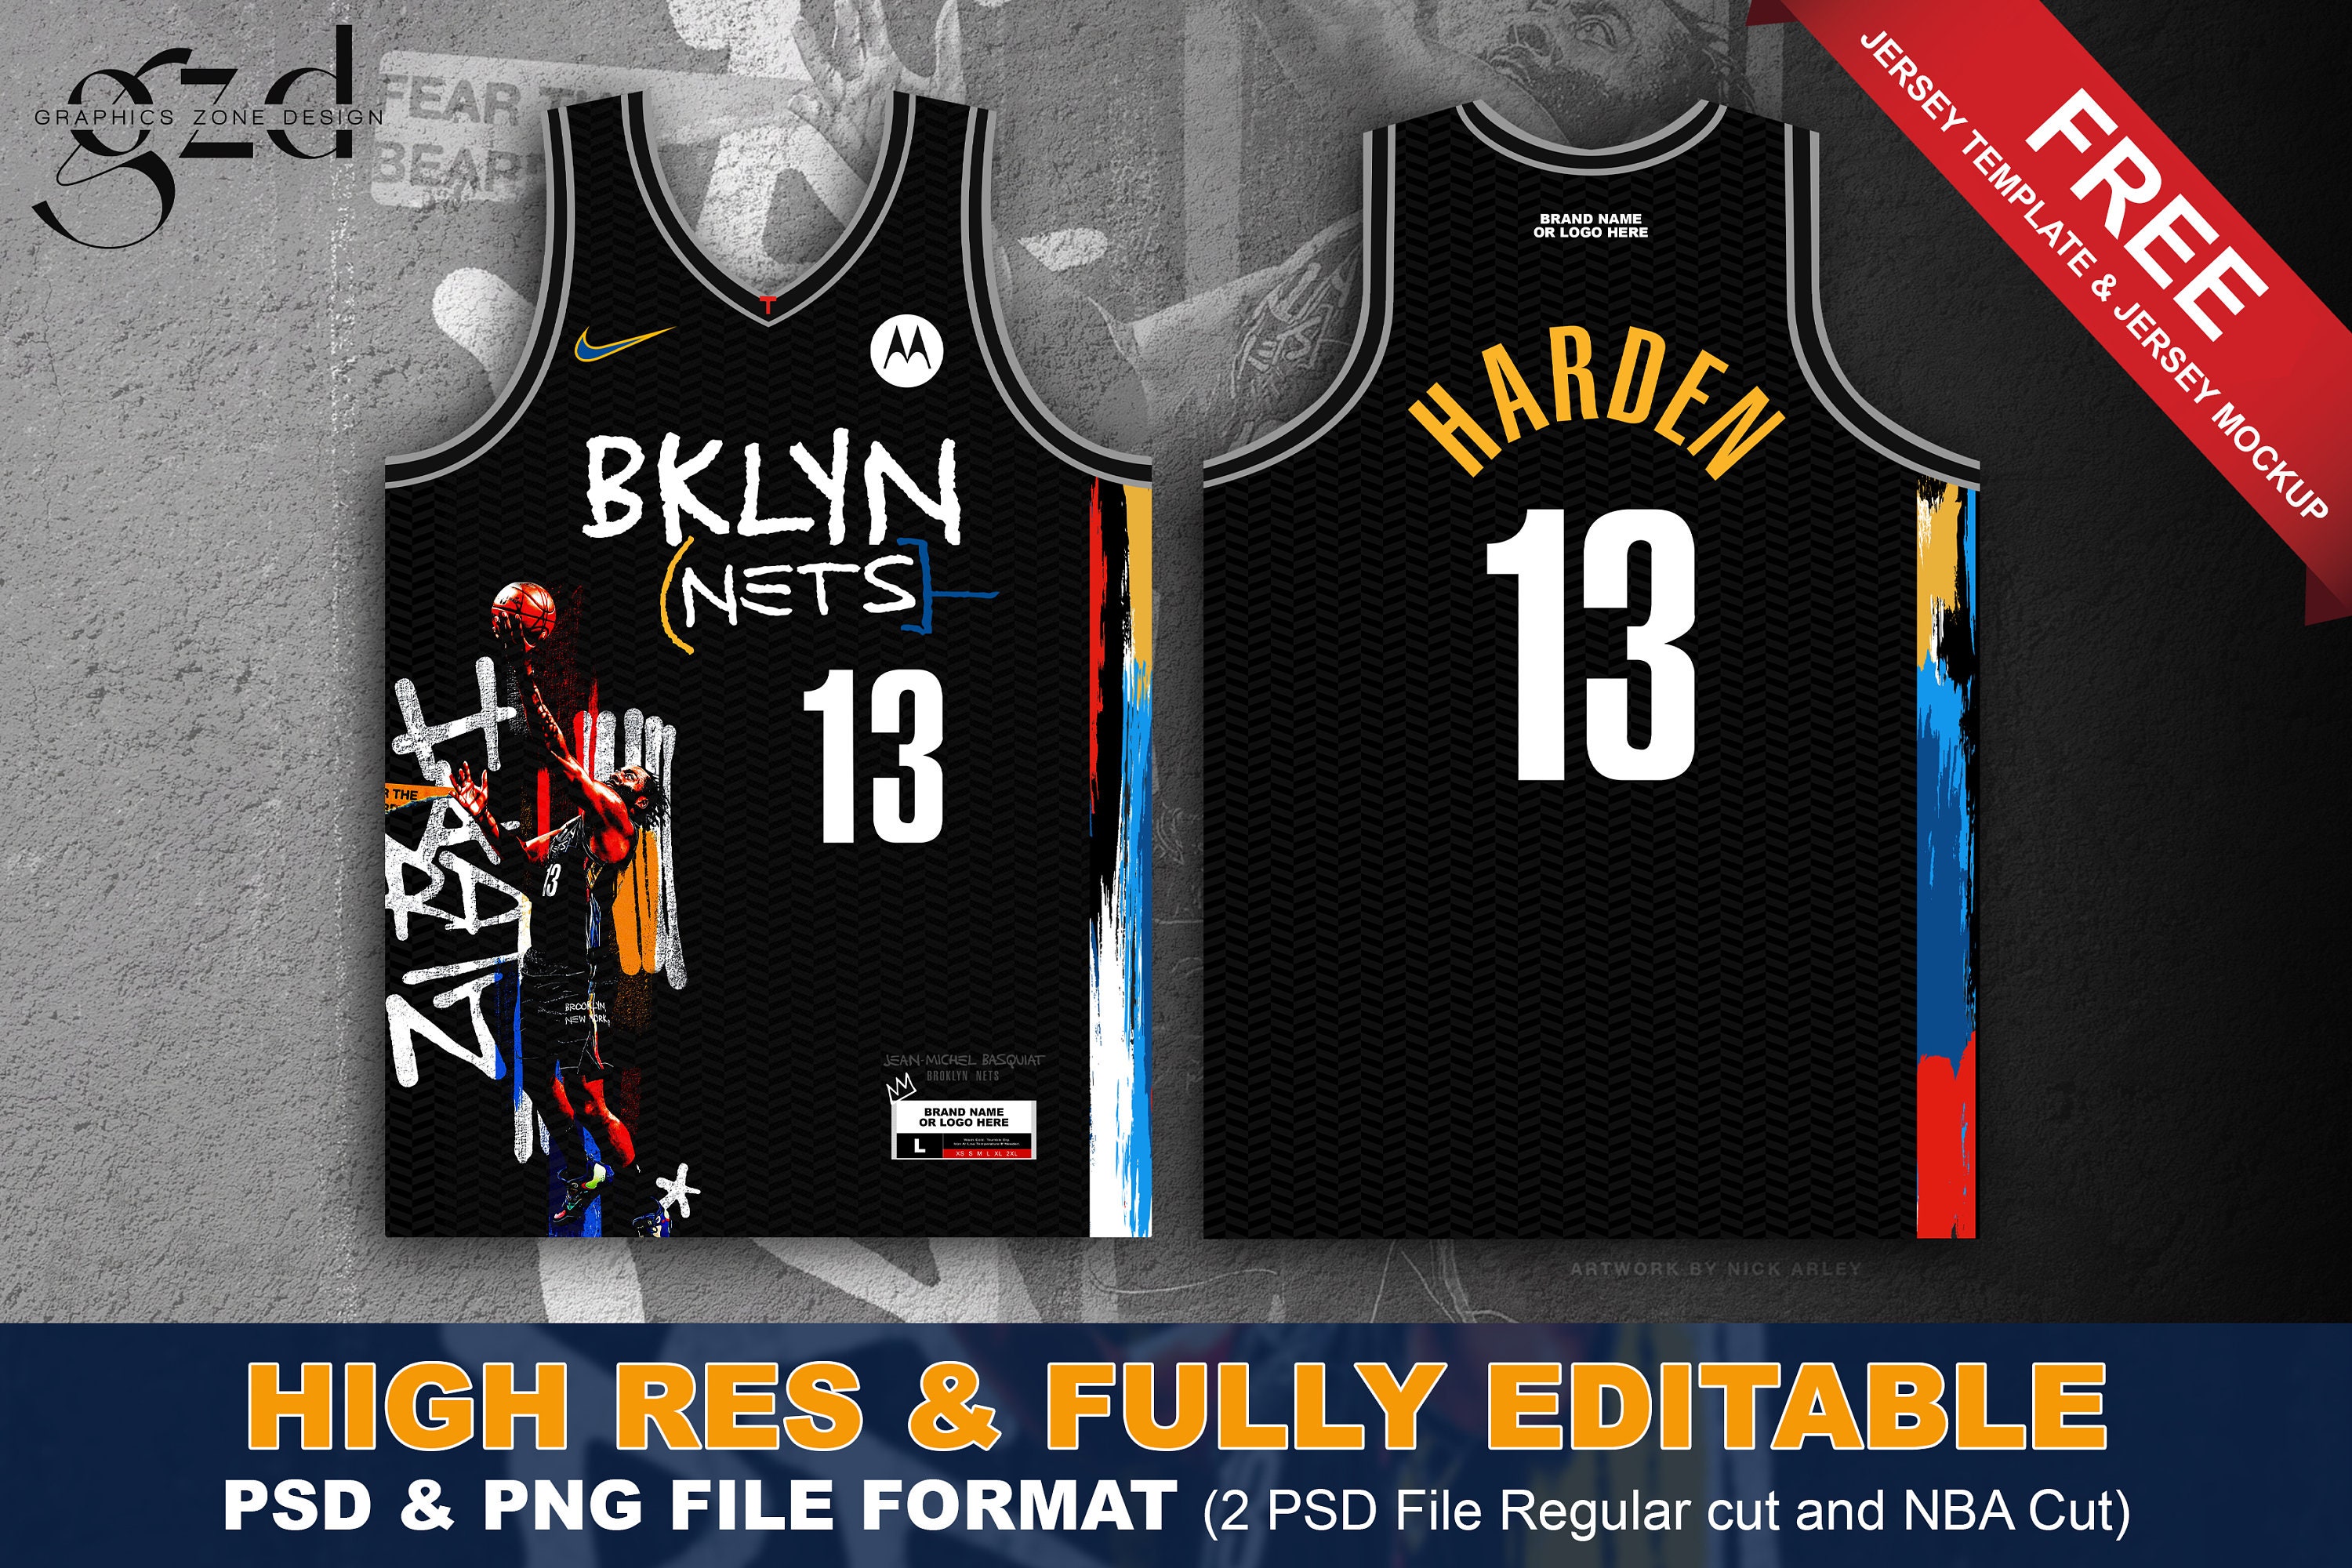 NBA CUT BASKETBALL JERSEY MOCKUP 2023 - JERSEY DESIGN FOR SUBLIMATION USING  PHOTOSHOP! FROM SCRATCH! 